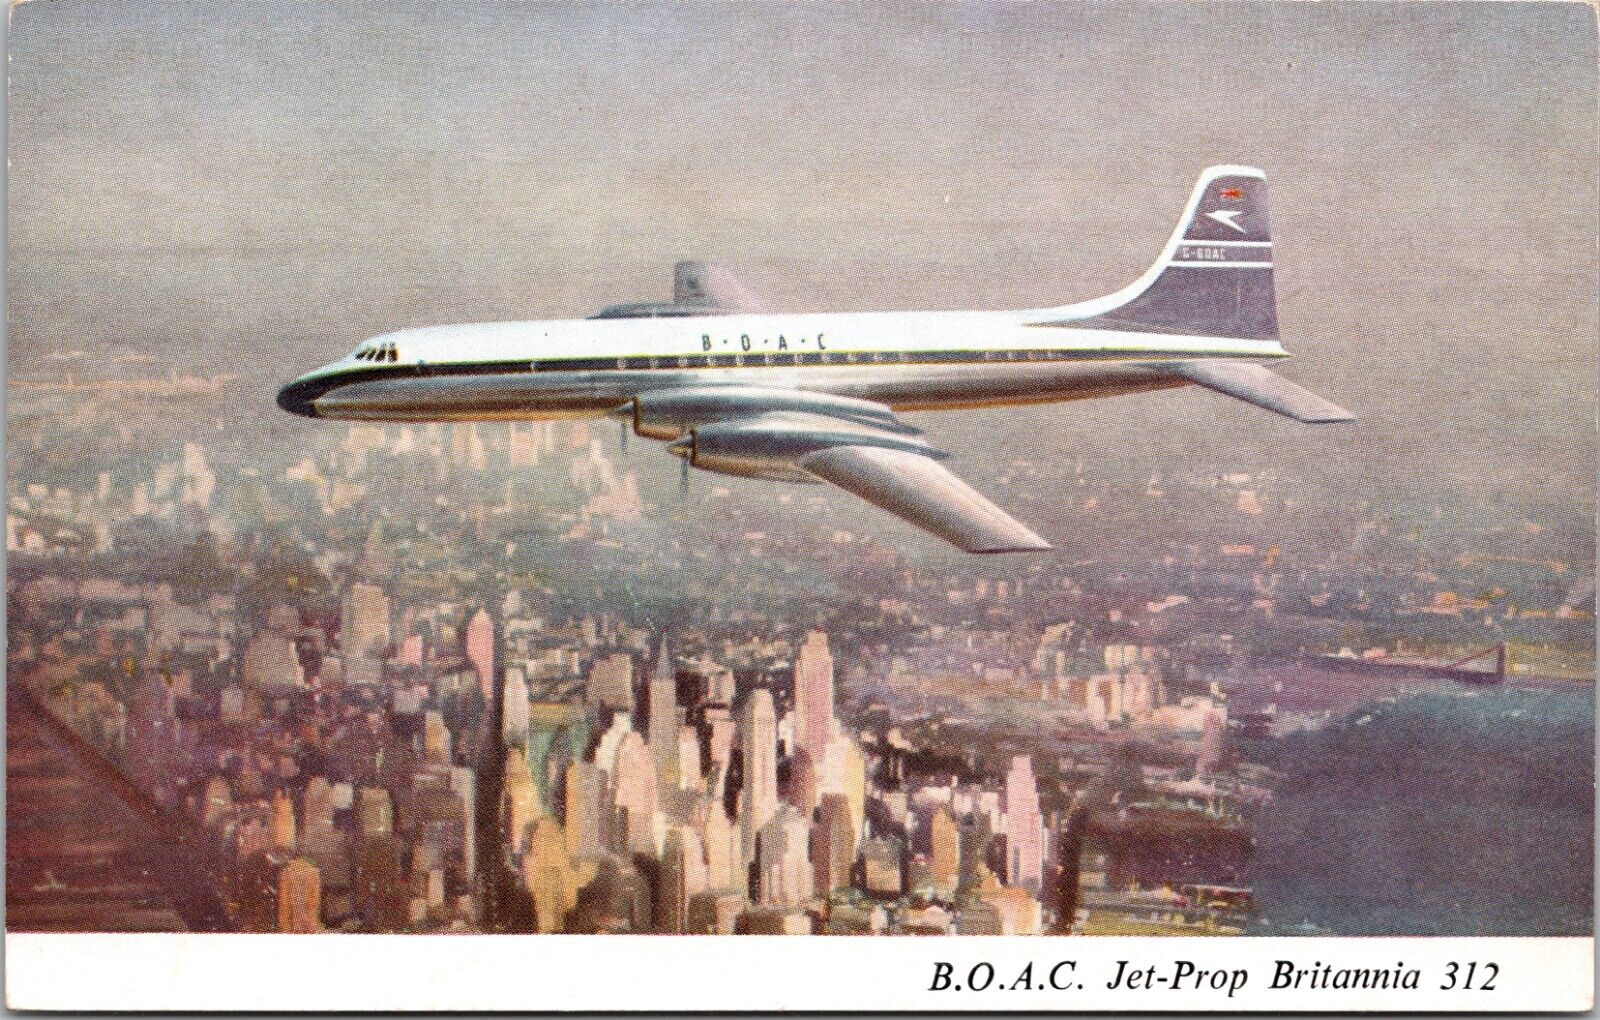 B.O.A.C. Jet Prop Britannia 312 Postcard Unposted Airline Advertising Used